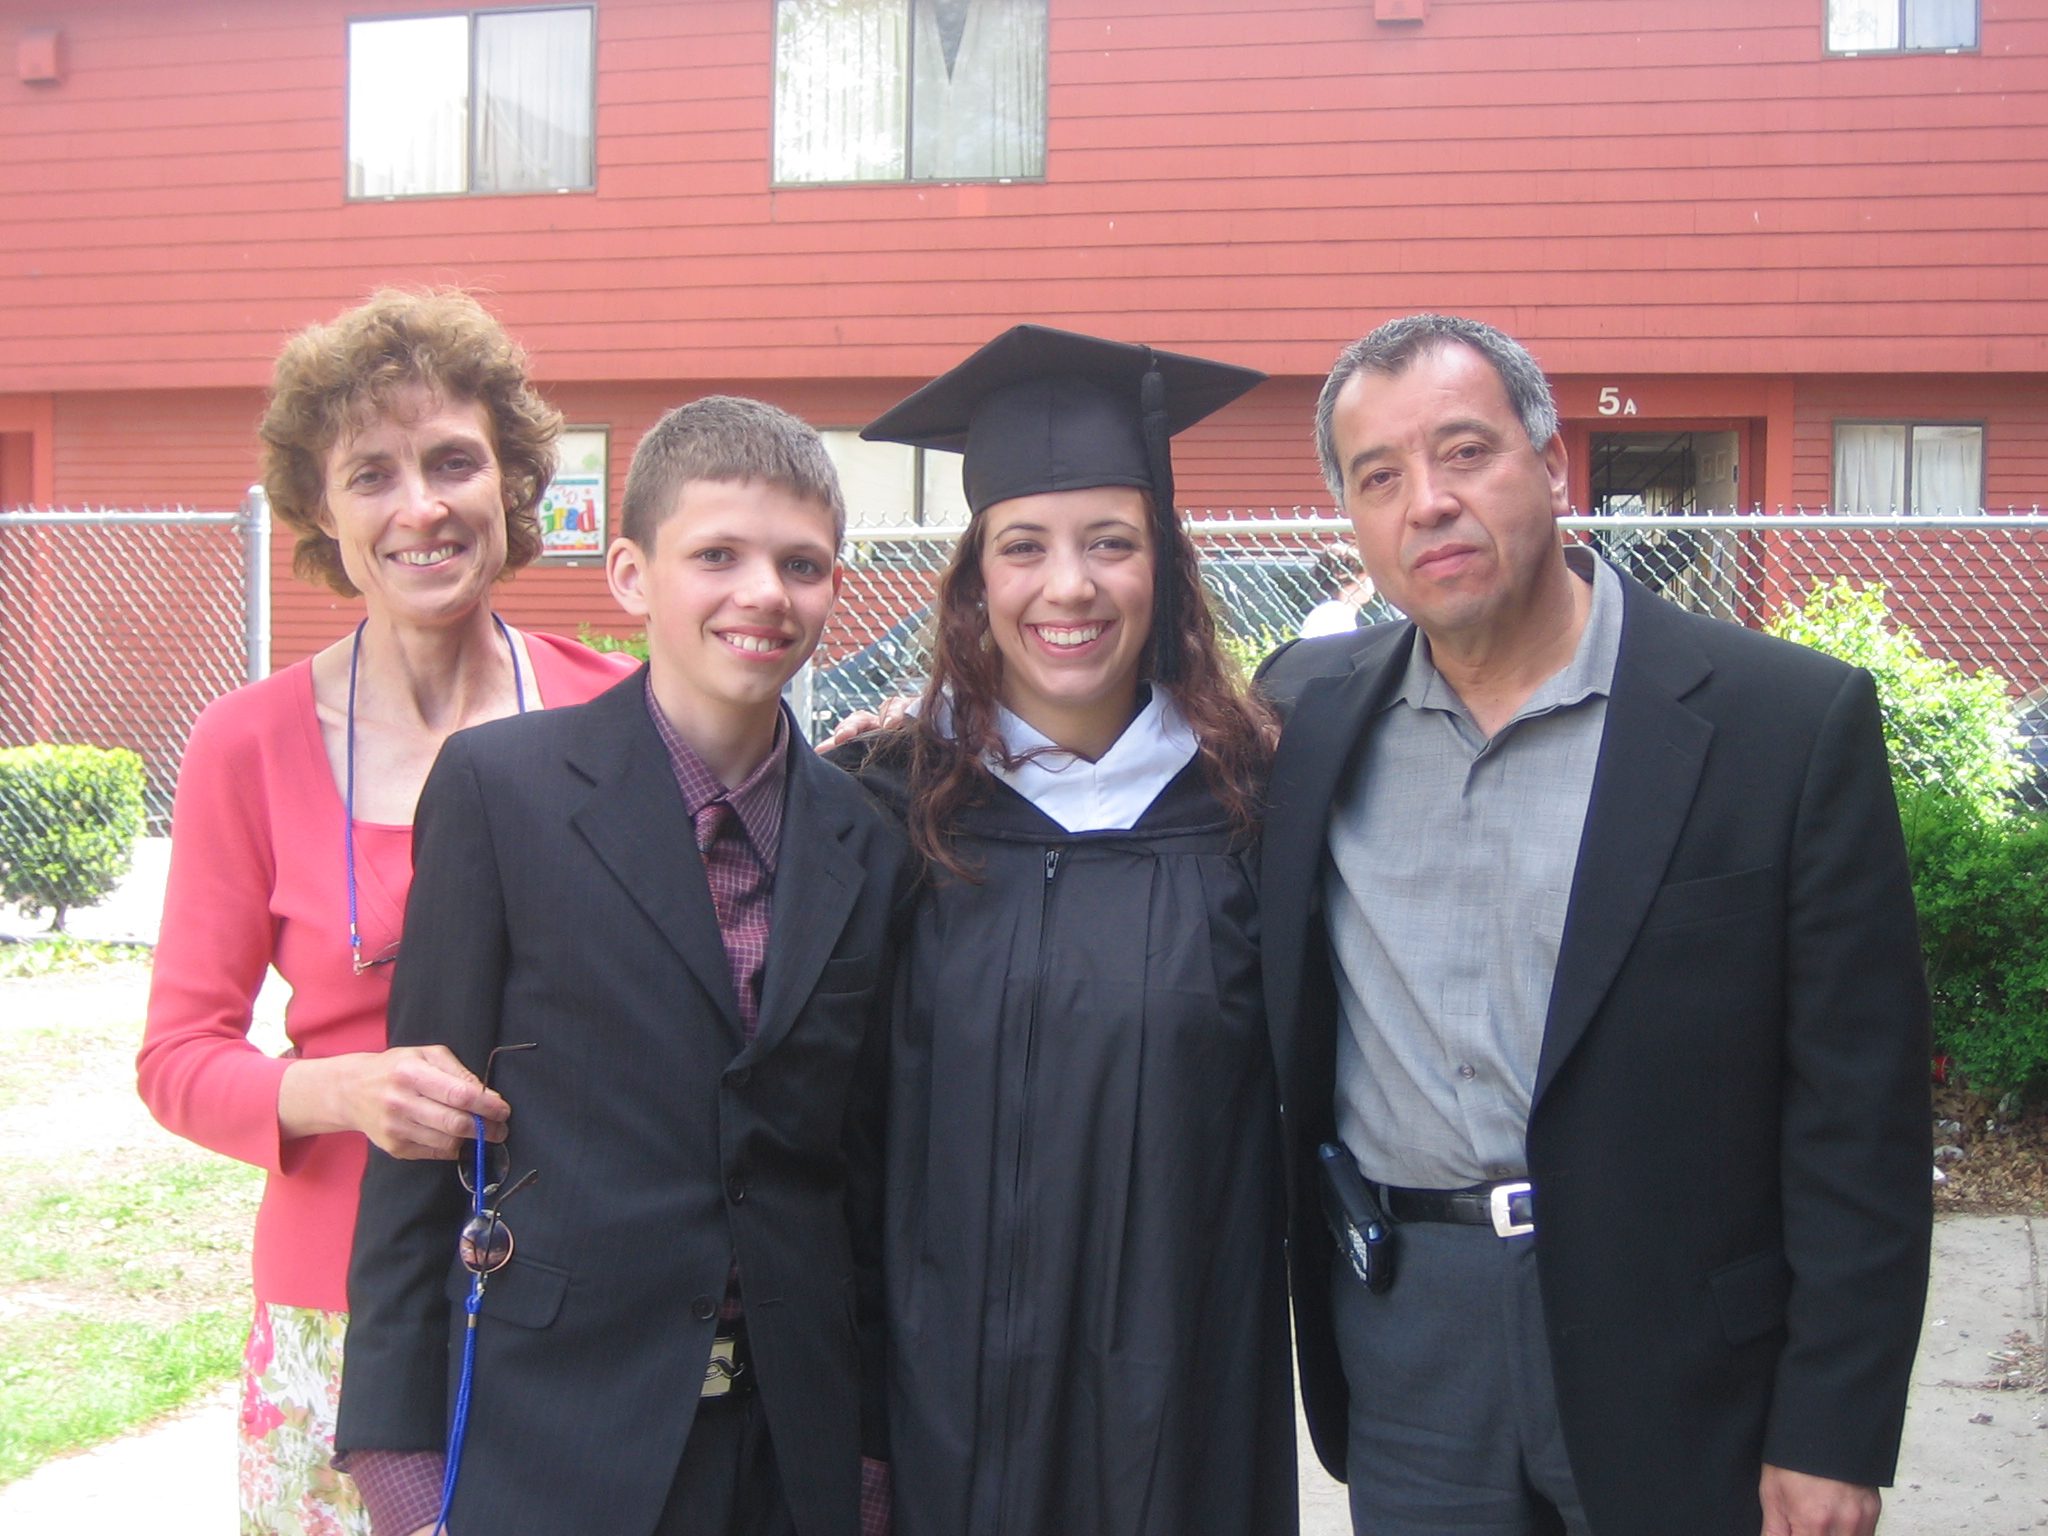 moya and family outside smiling, moya is wearing a graduation cap and gown